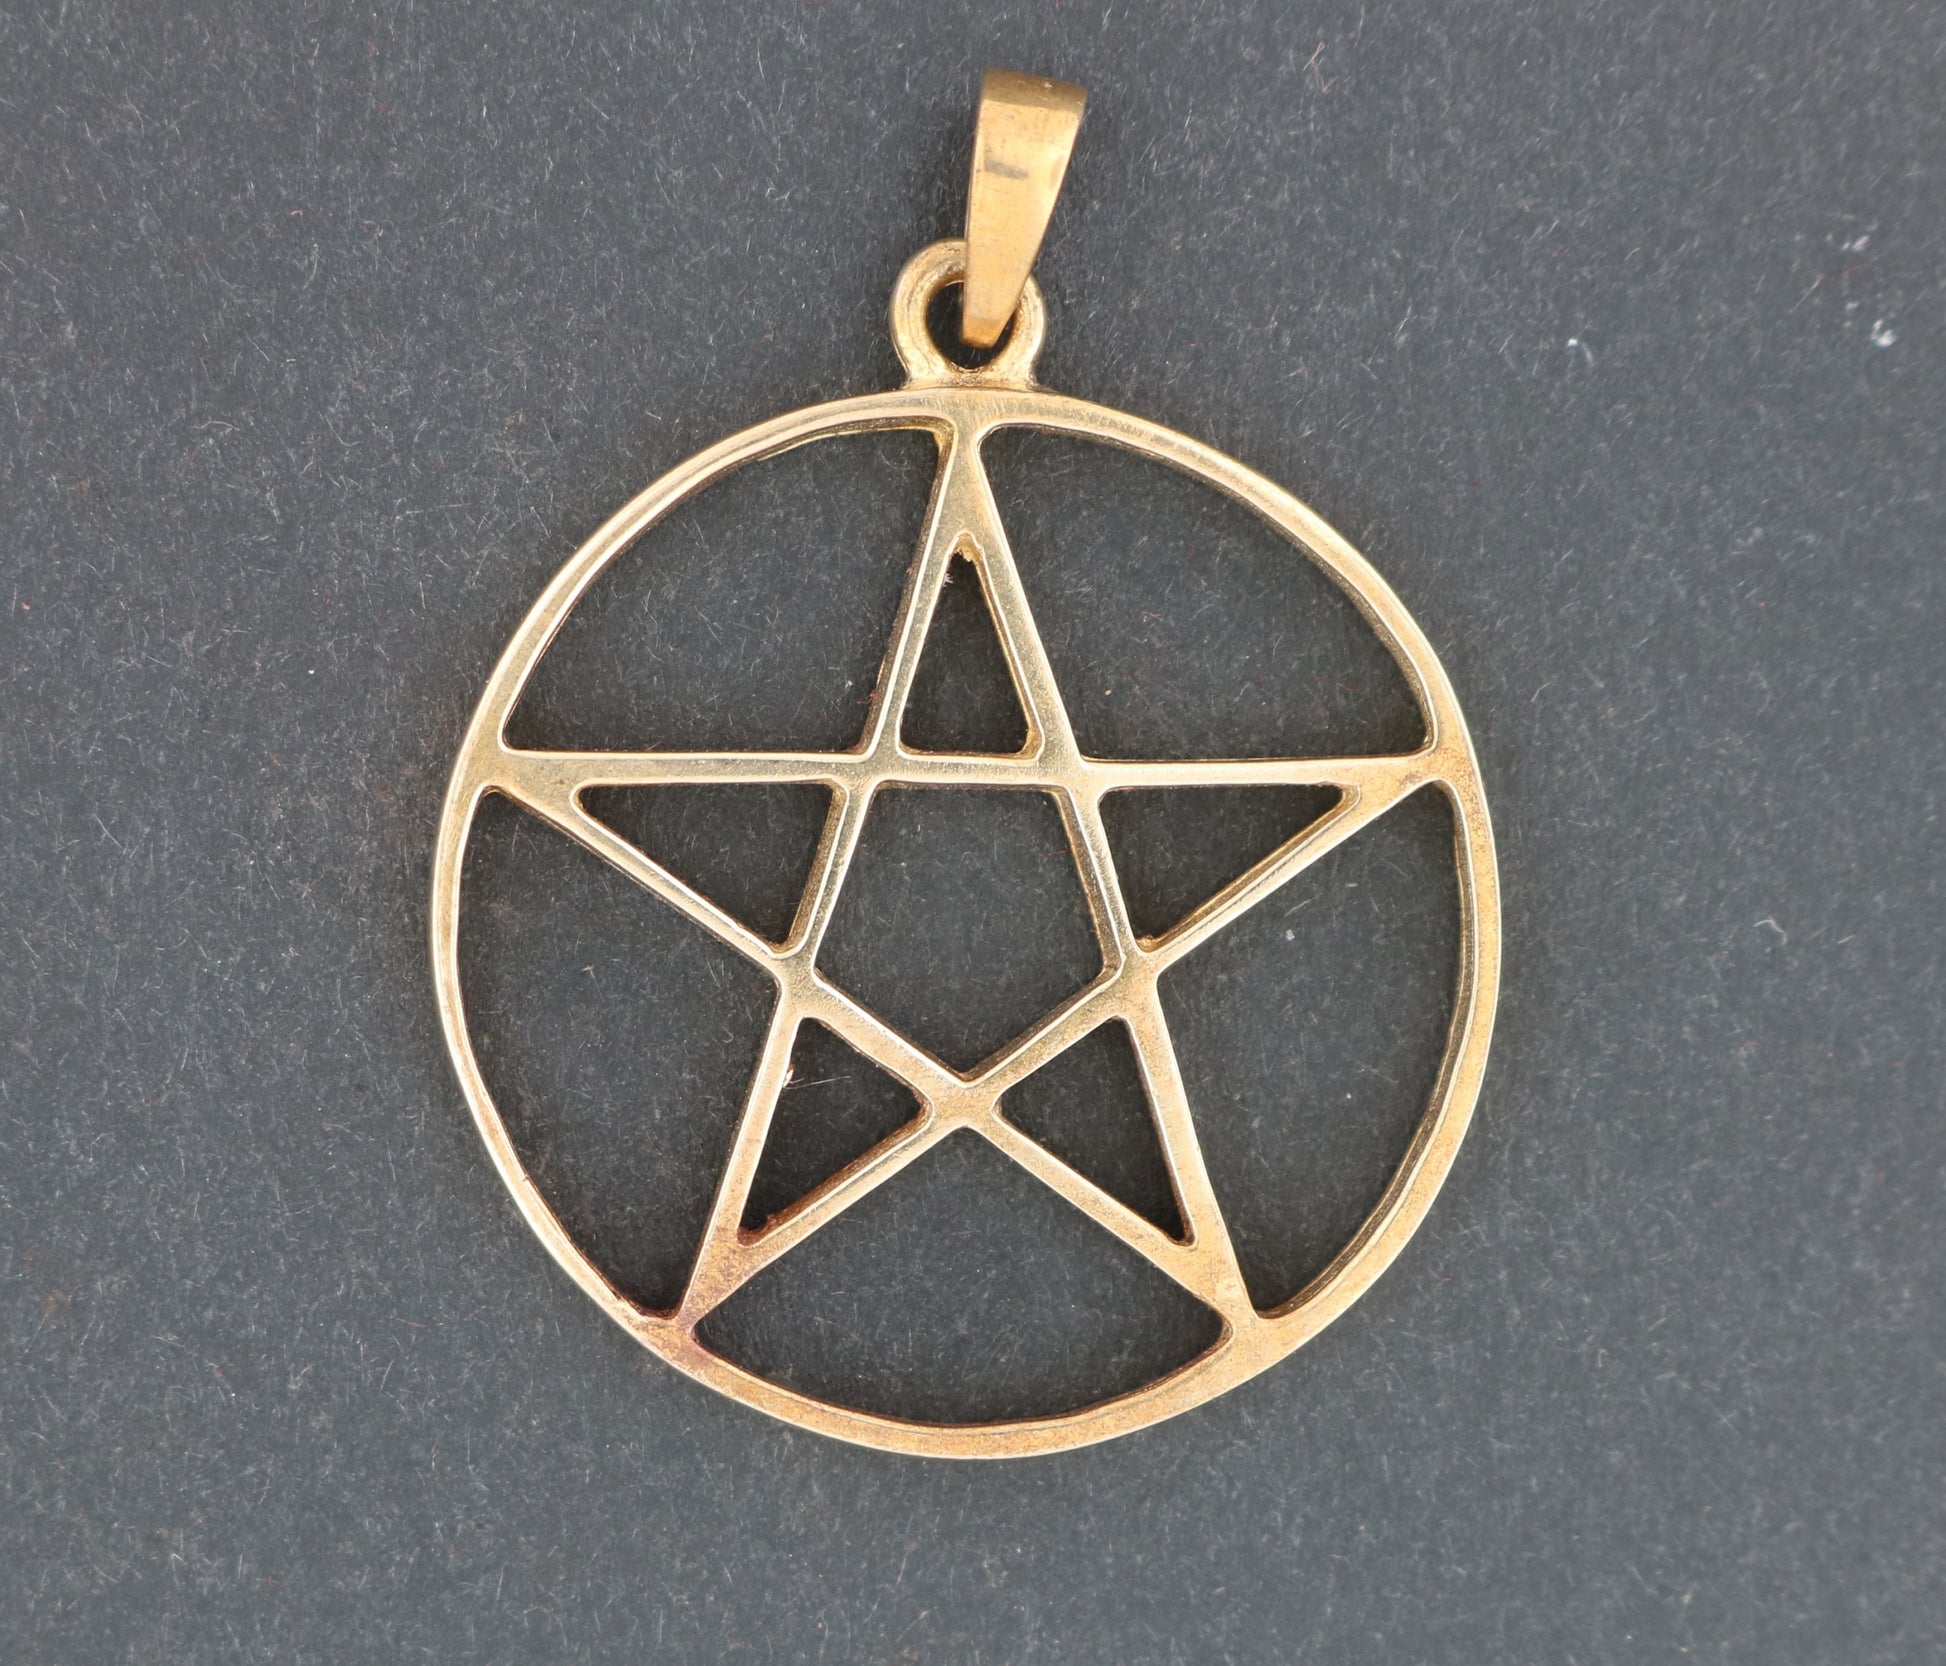 Large Pentacle Pendant in 925 Silver or Bronze, Pentacle Charm Jewelry, Witches Star Pendant Necklace, Jewellery Gift for Wicca Pagan, Antique Bronze Pentacle Pendant, Bronze Pentacle Charm, Large Bronze Pentacle Pendant, Pagan Pentacle Charm